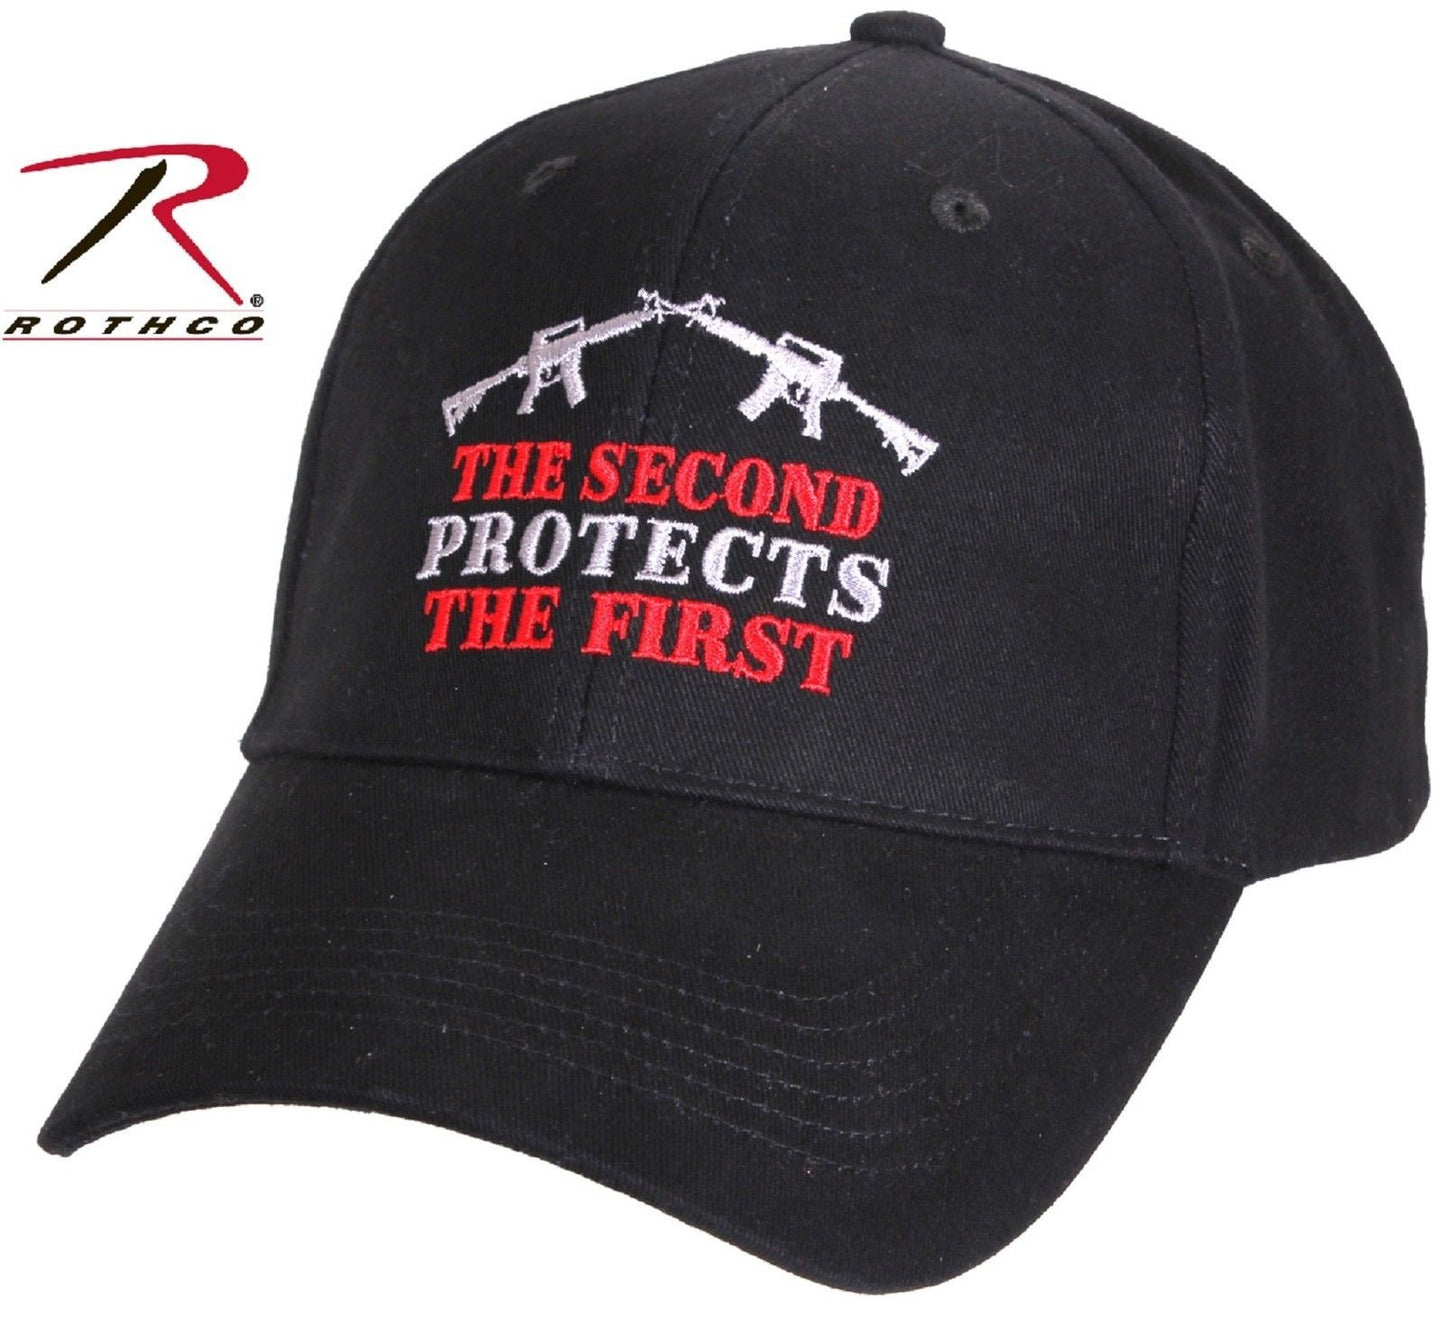 Rothco Mens "The Second Protects the First" Low Profile Adjustable Cap Hat